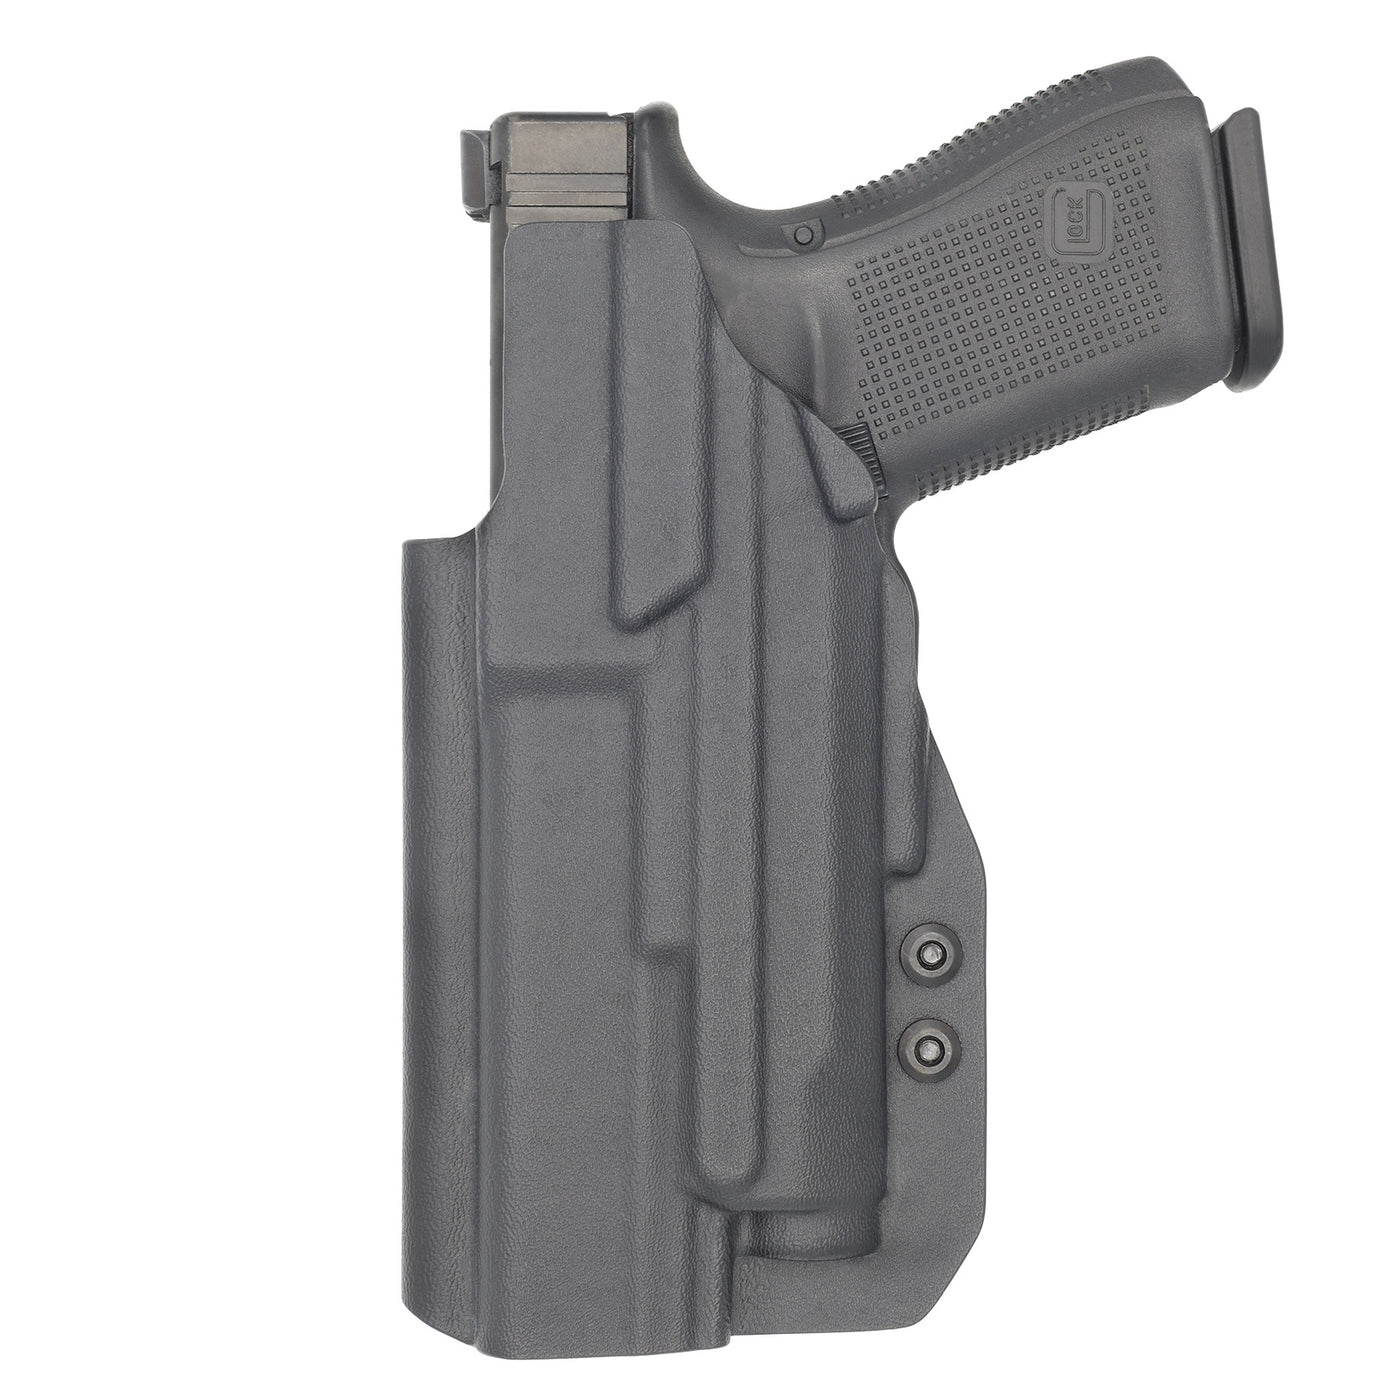 C&G Holsters IWB inside the waistband Holster for the Glock 19/23 APLc back view